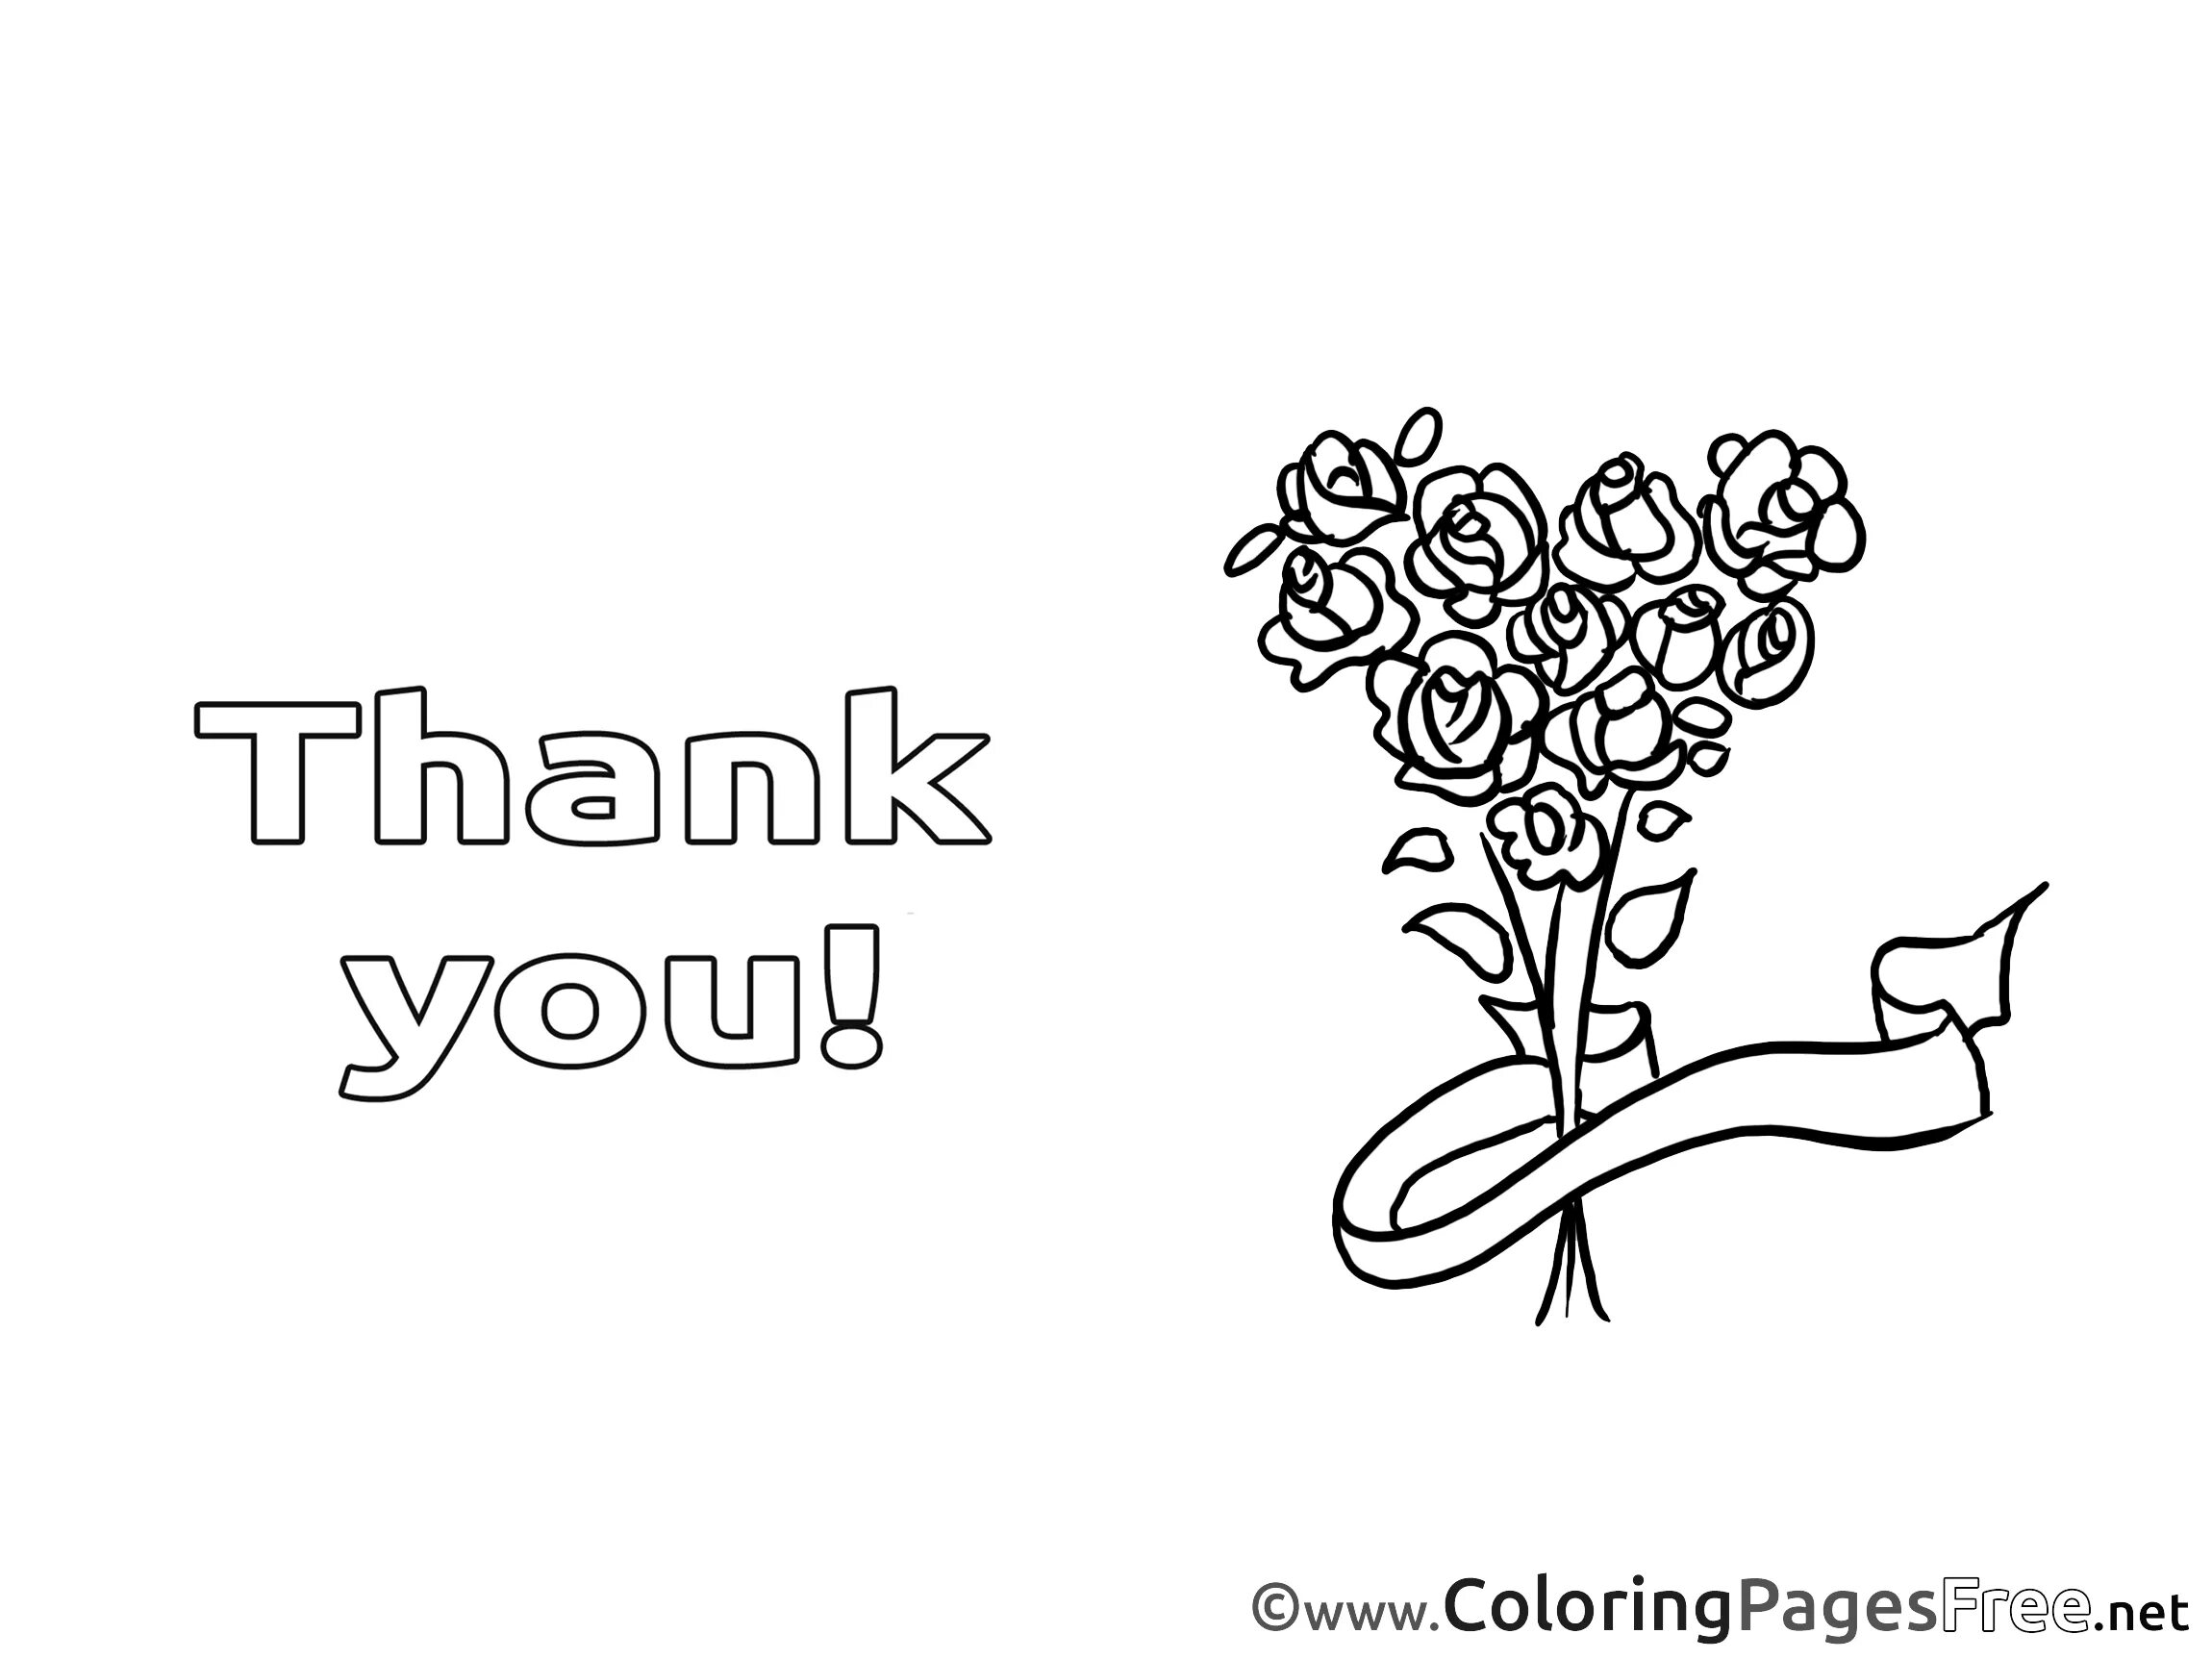 Thank you live coloring page